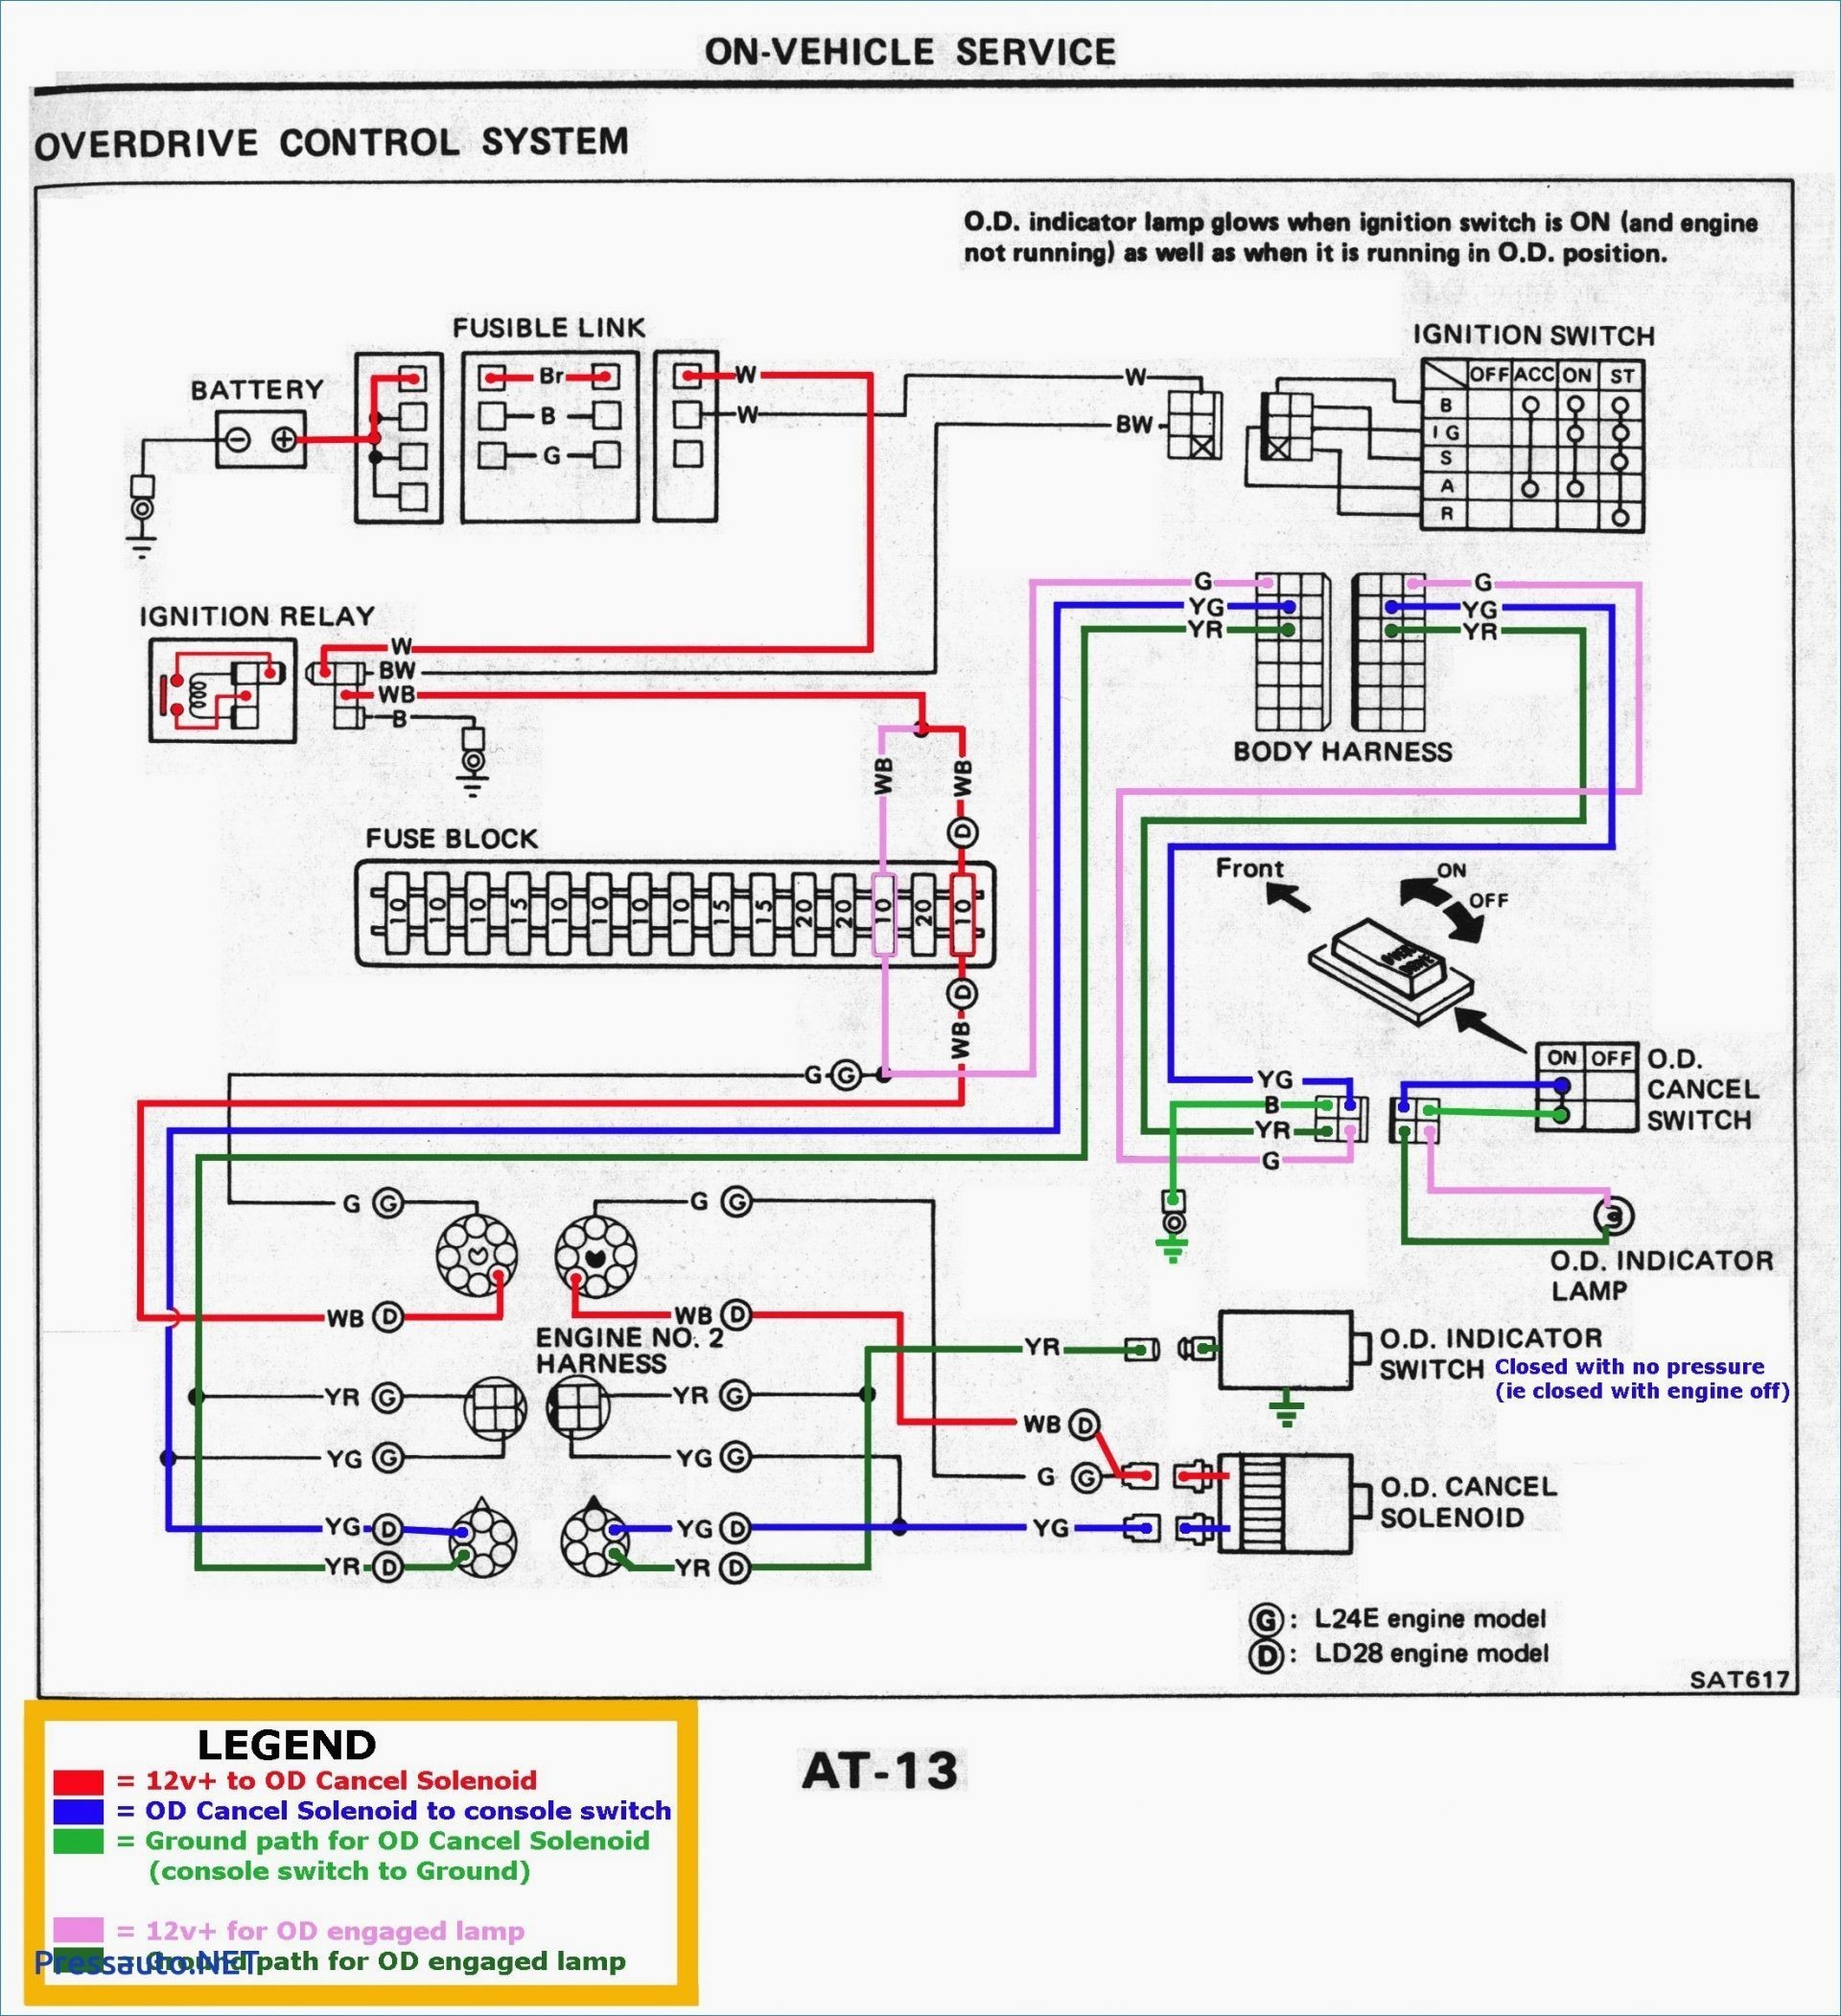 2004 Chevy Tail Light Electrical Diagram â¦diagram Basedâ¦ Chevy Truck Tail Light Wiring Diagram